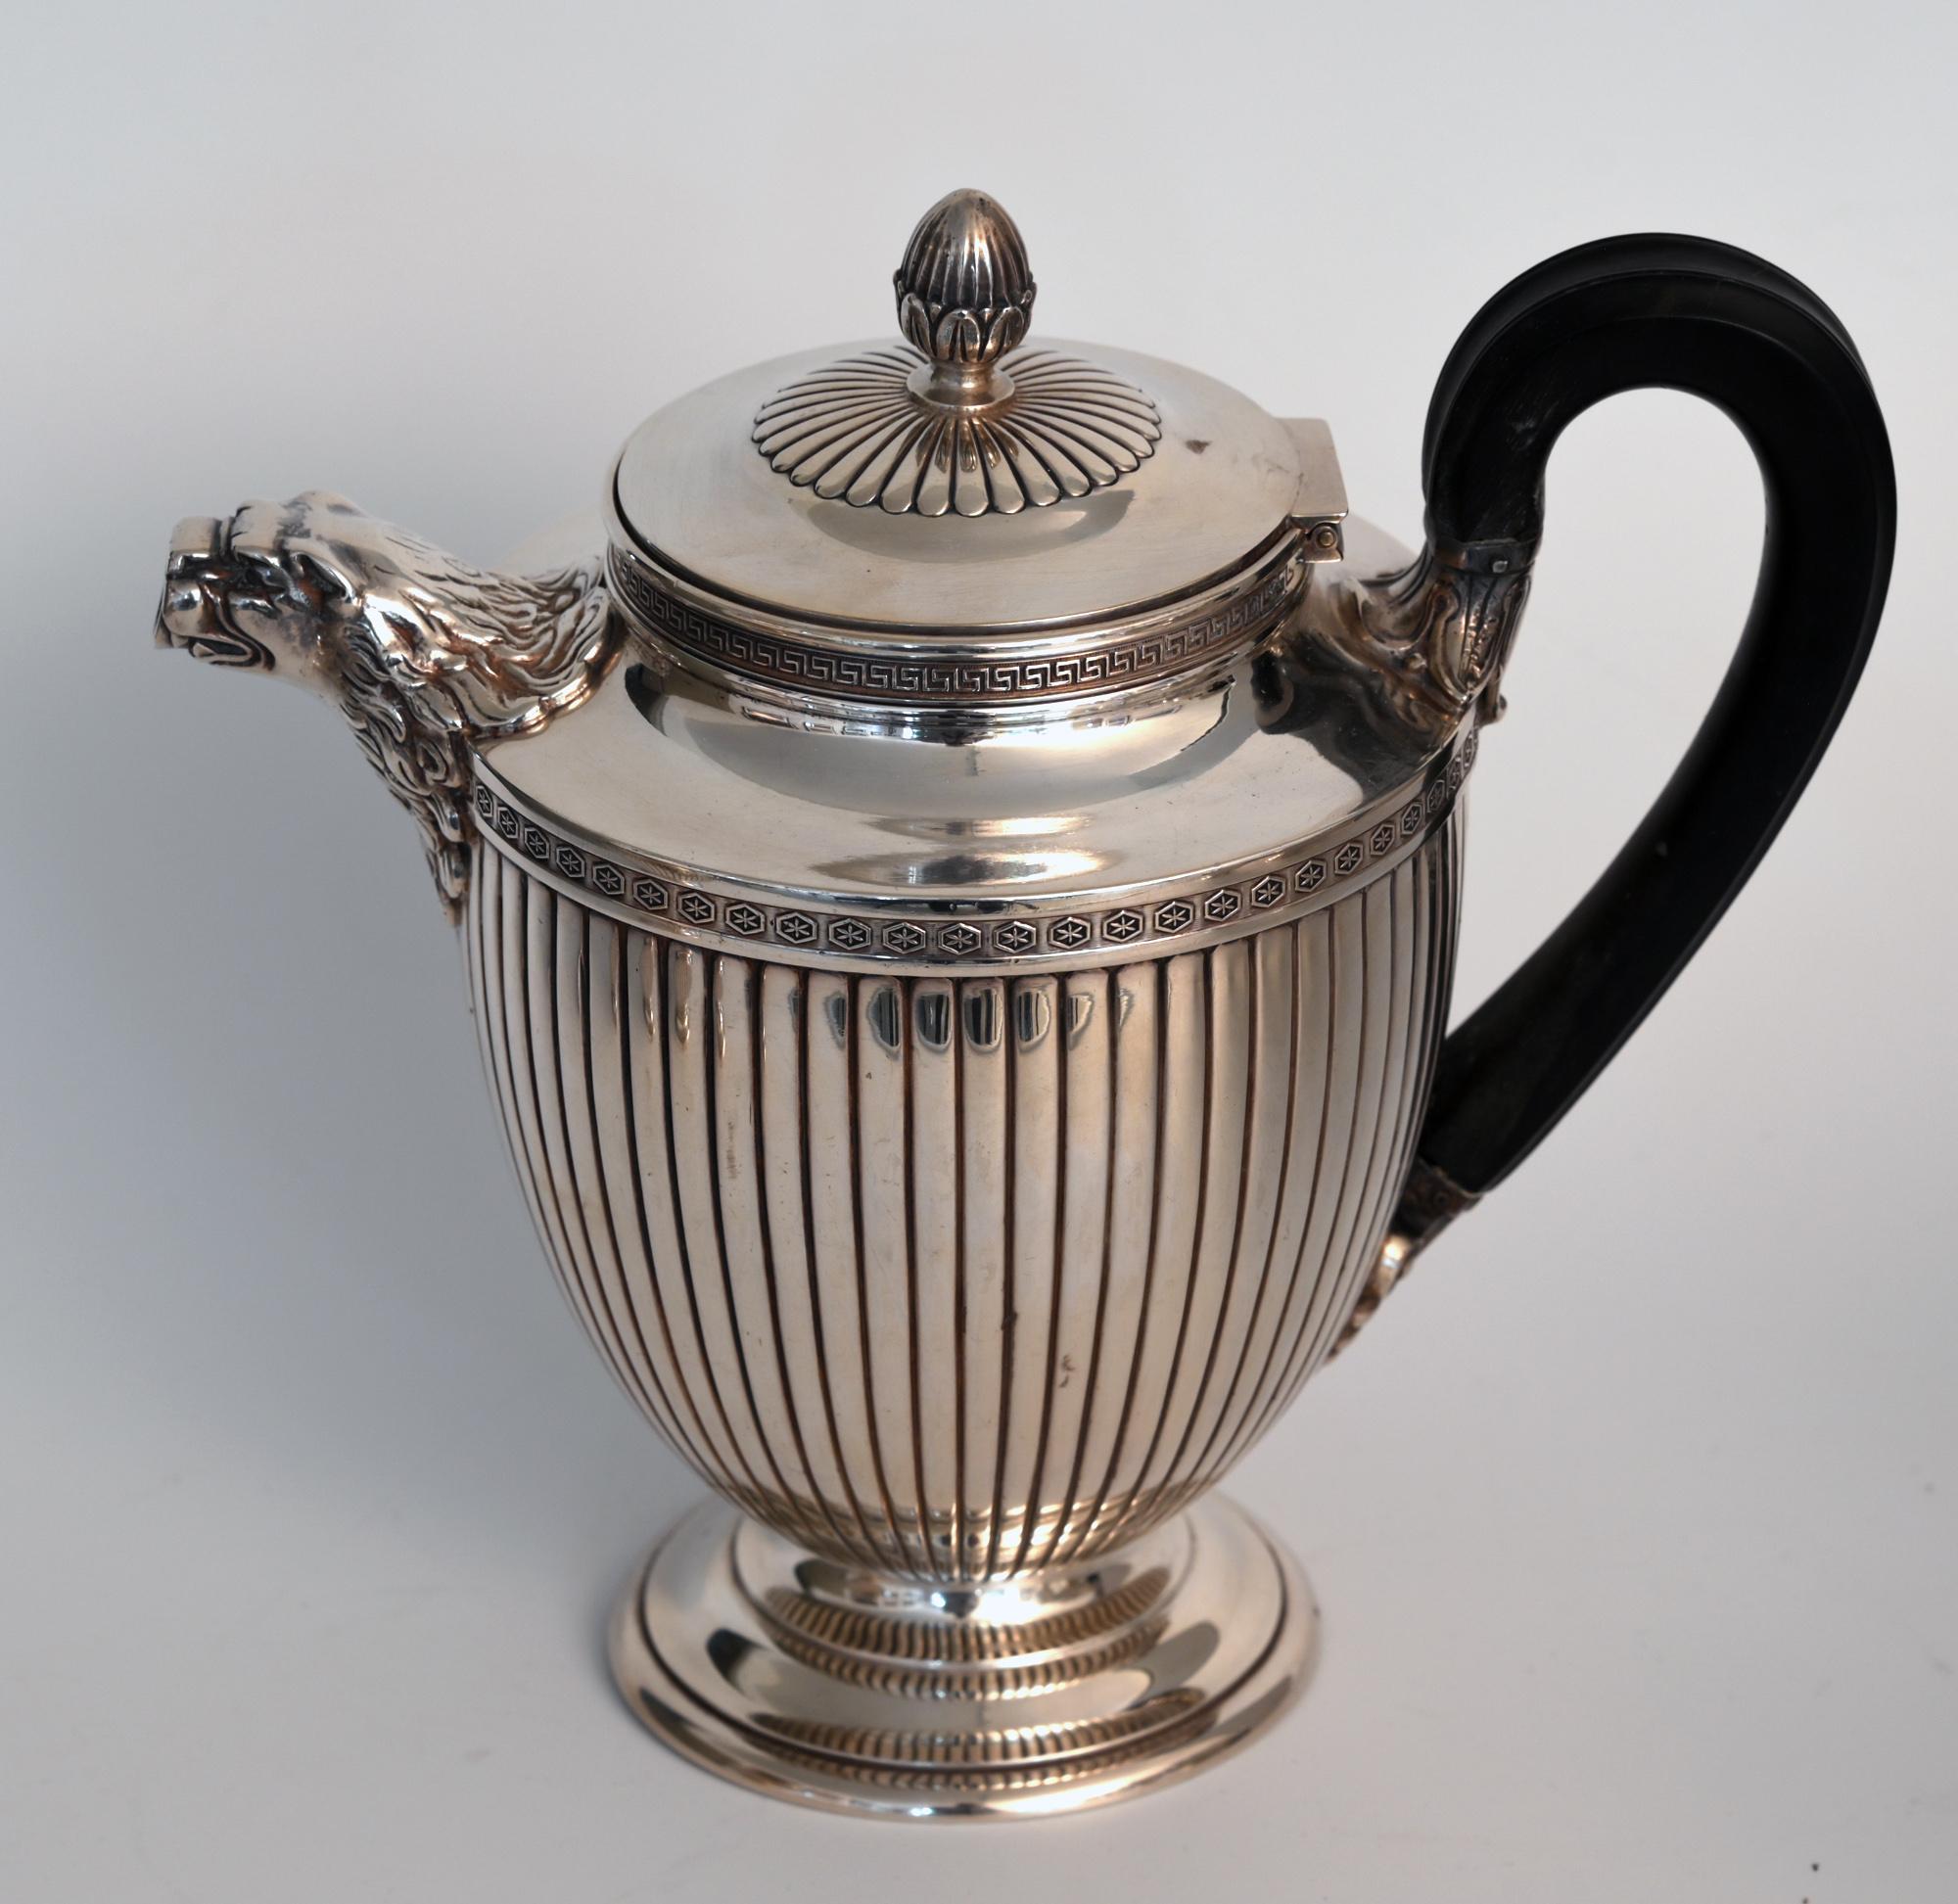 A timeless set for tea and coffee in neoclassical form in silver 950 with wood handle, from the maker Jean E. Puiforcat
These are a beautiful and timeless set for tea and coffee, consisting of a tea pot, coffee pot, creamer and sugar bowl. Fully